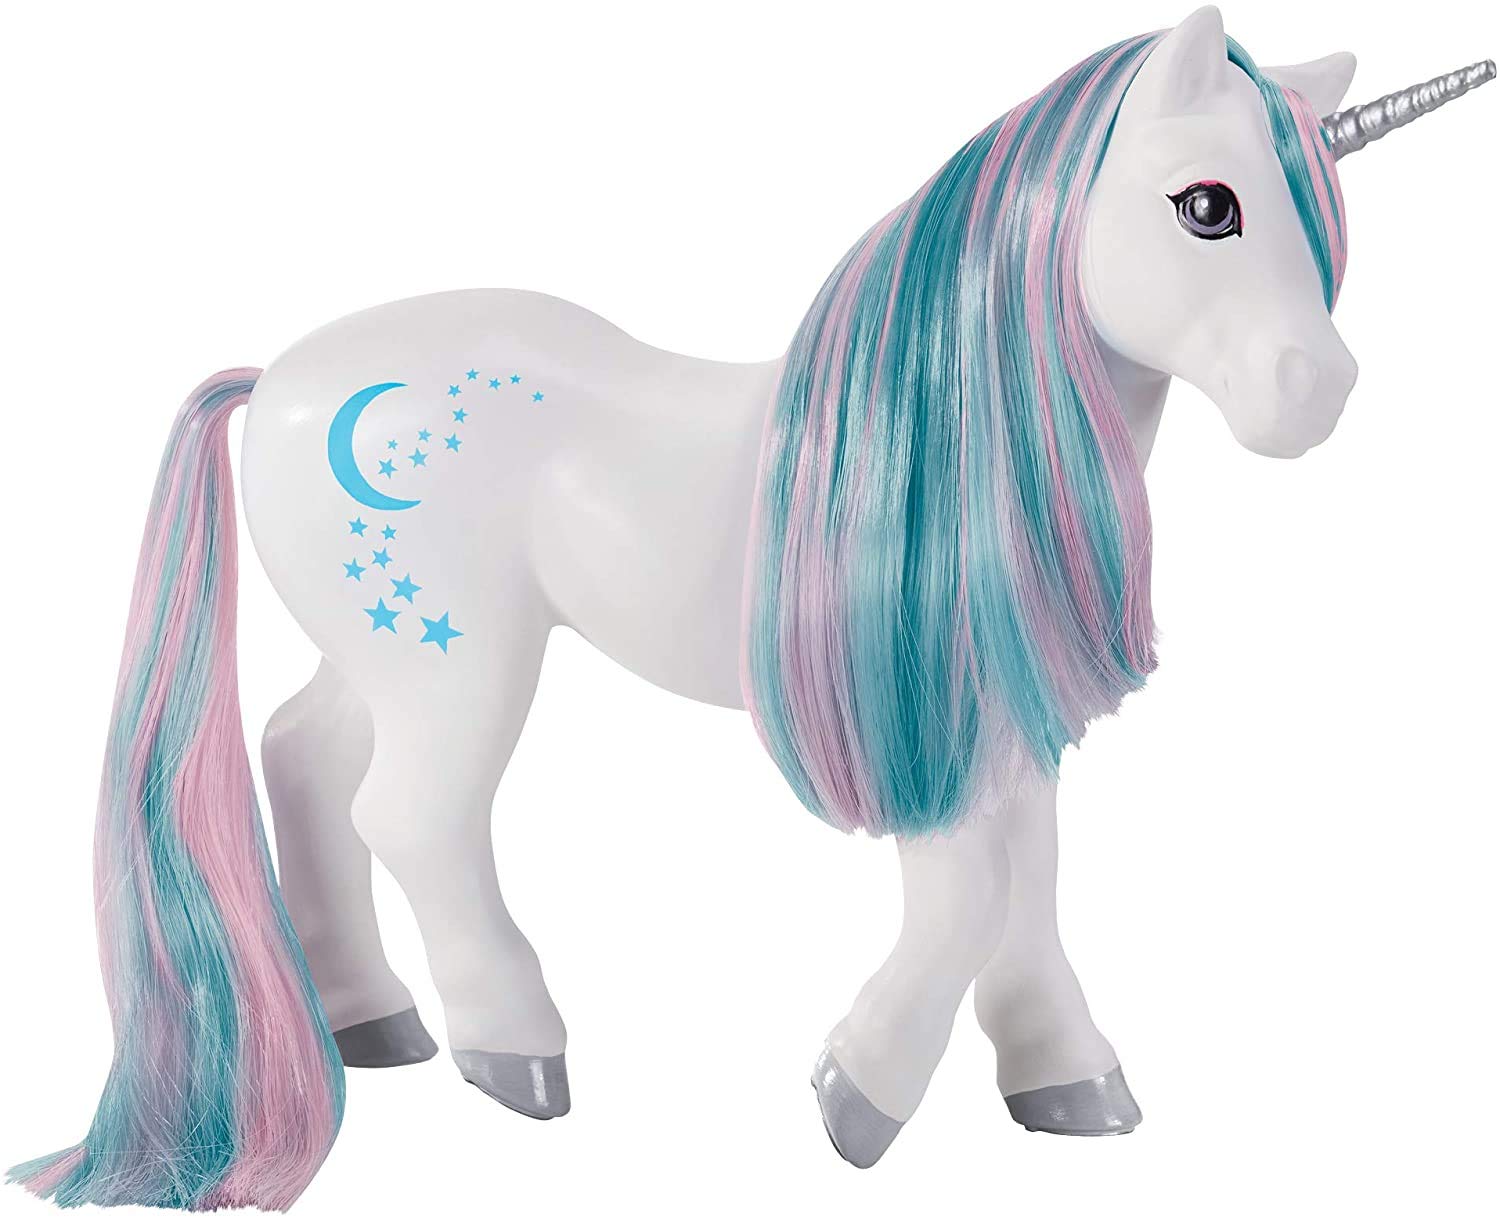 Breyer Horses Color Changing Bath Toy | Luna The Unicorn | Purple / Pink / White with Surprise Blue Color | 8.5" x 7" | Unicorn Toy | Ages 3+ | Model #7233, Purple, White, Pink